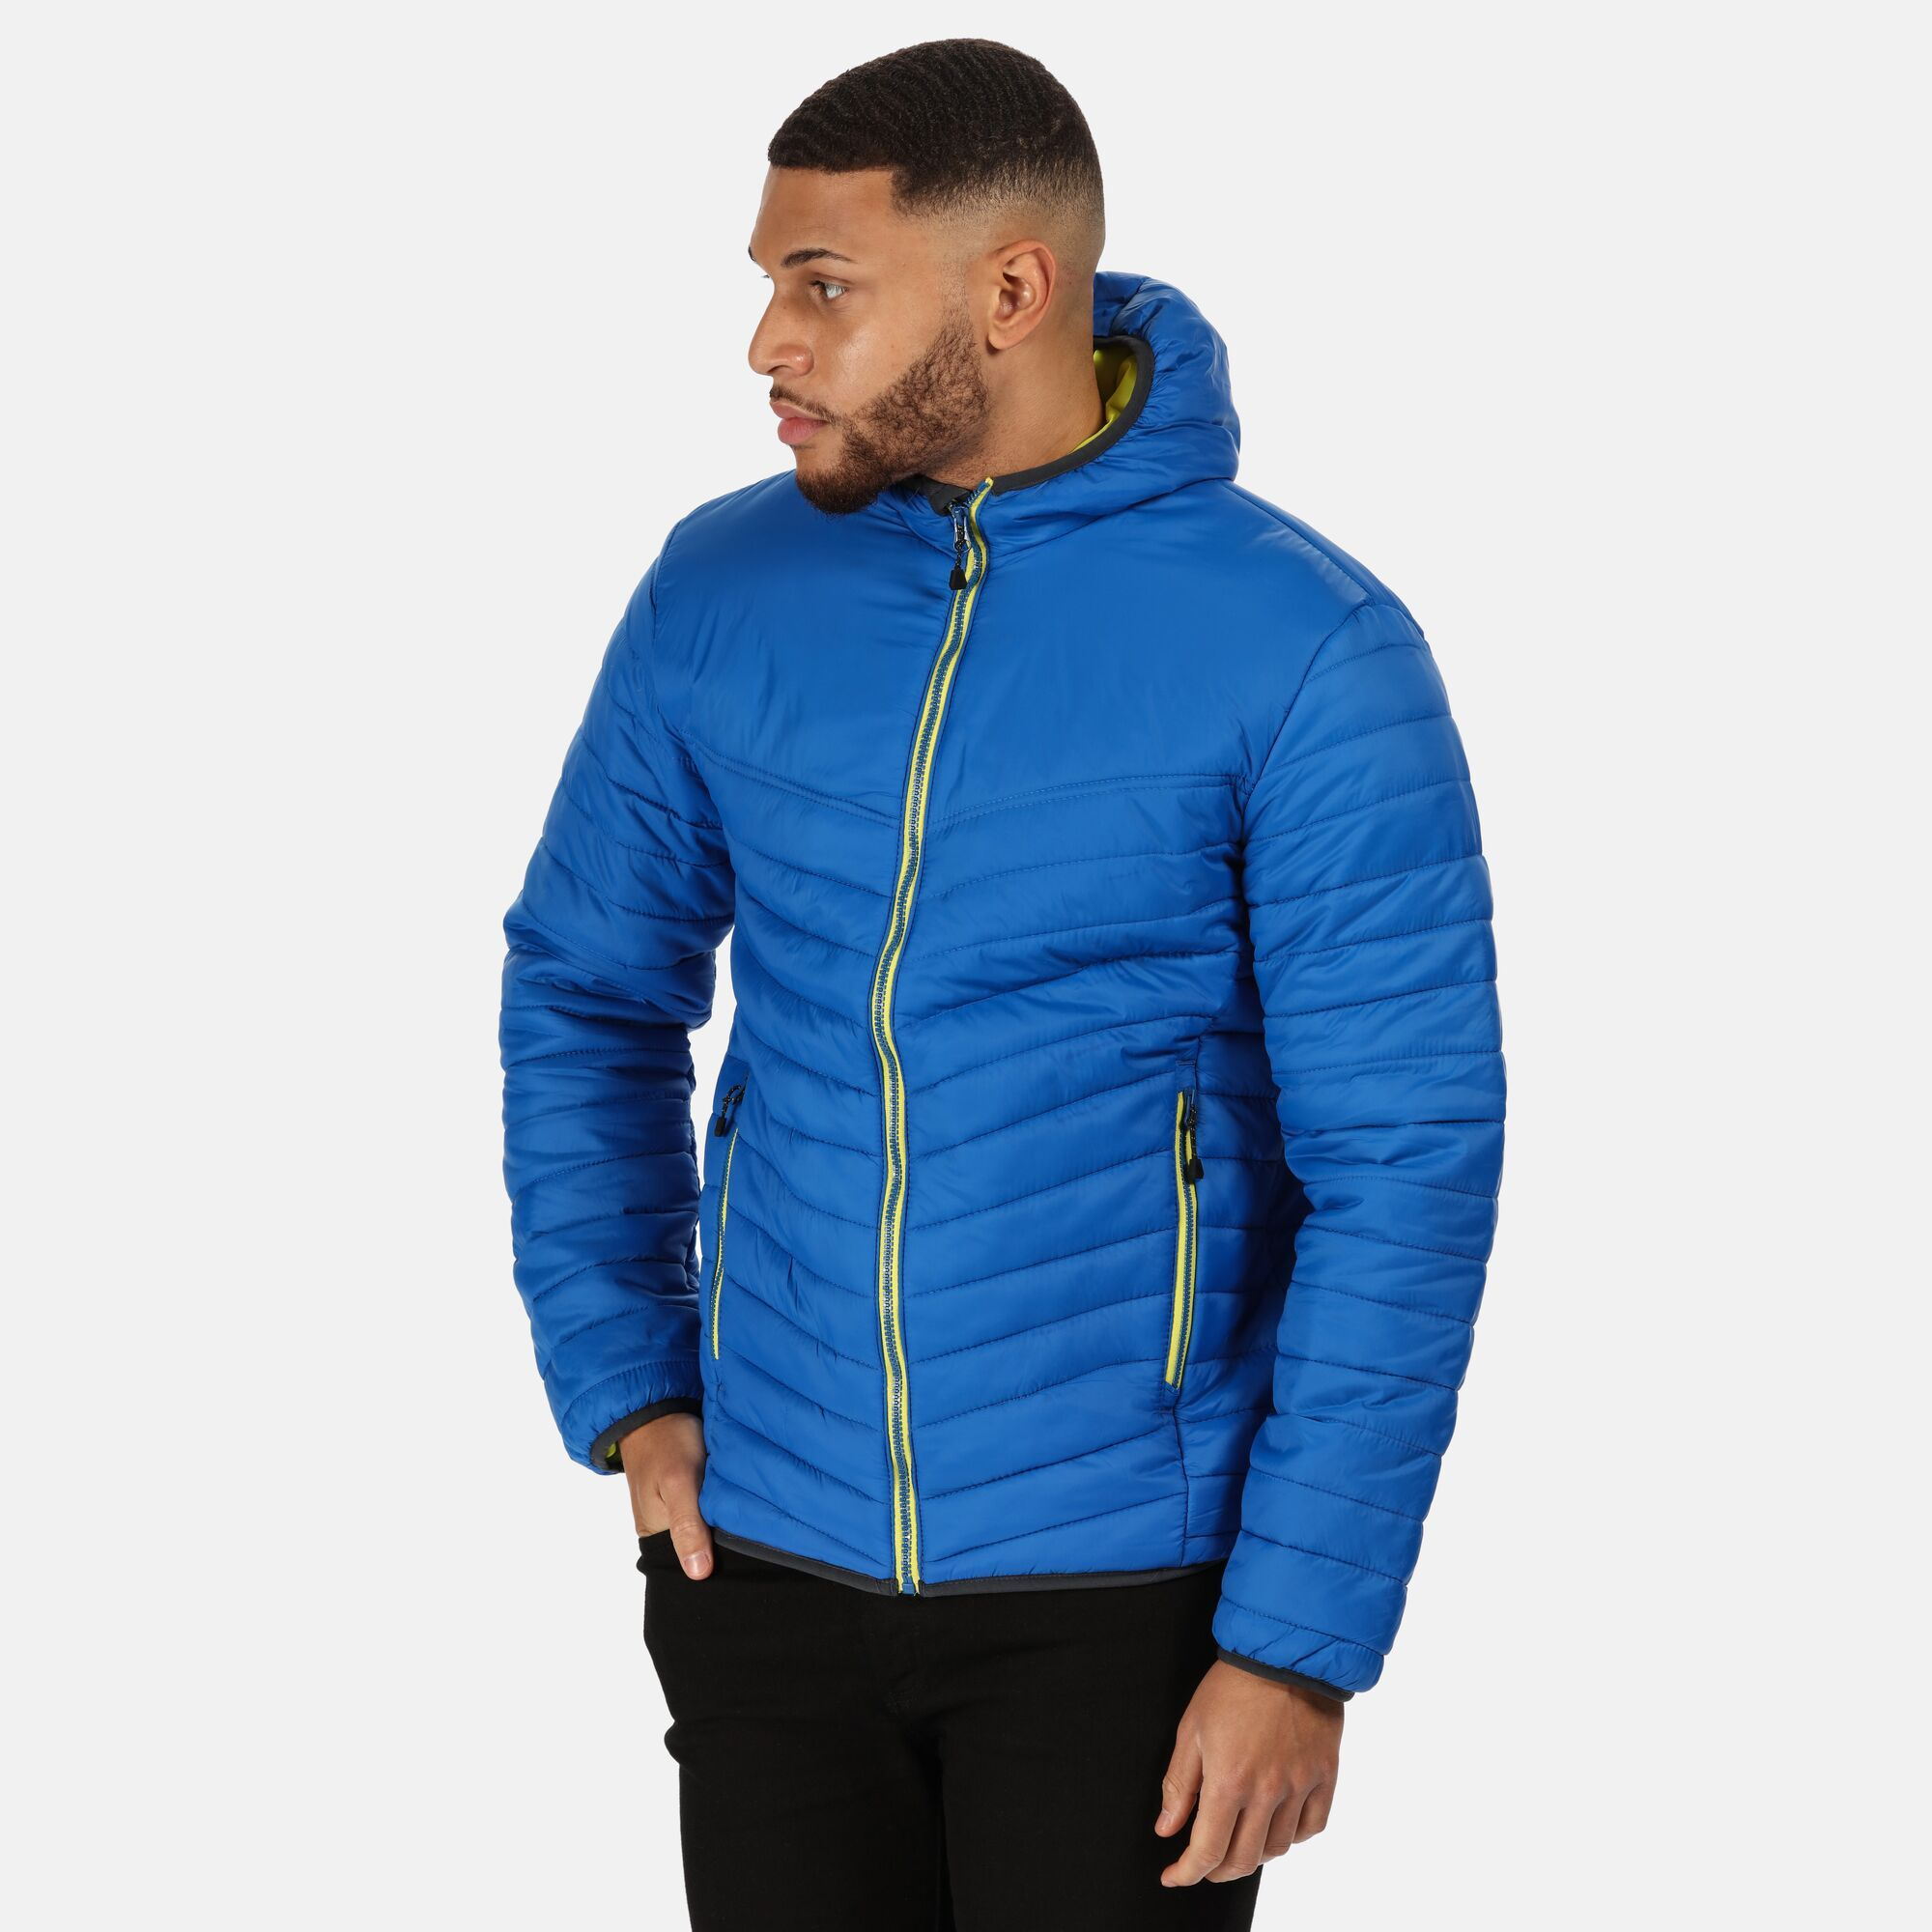 Professional Men/'s Acadia II Insulated Puffer Jacket Blue